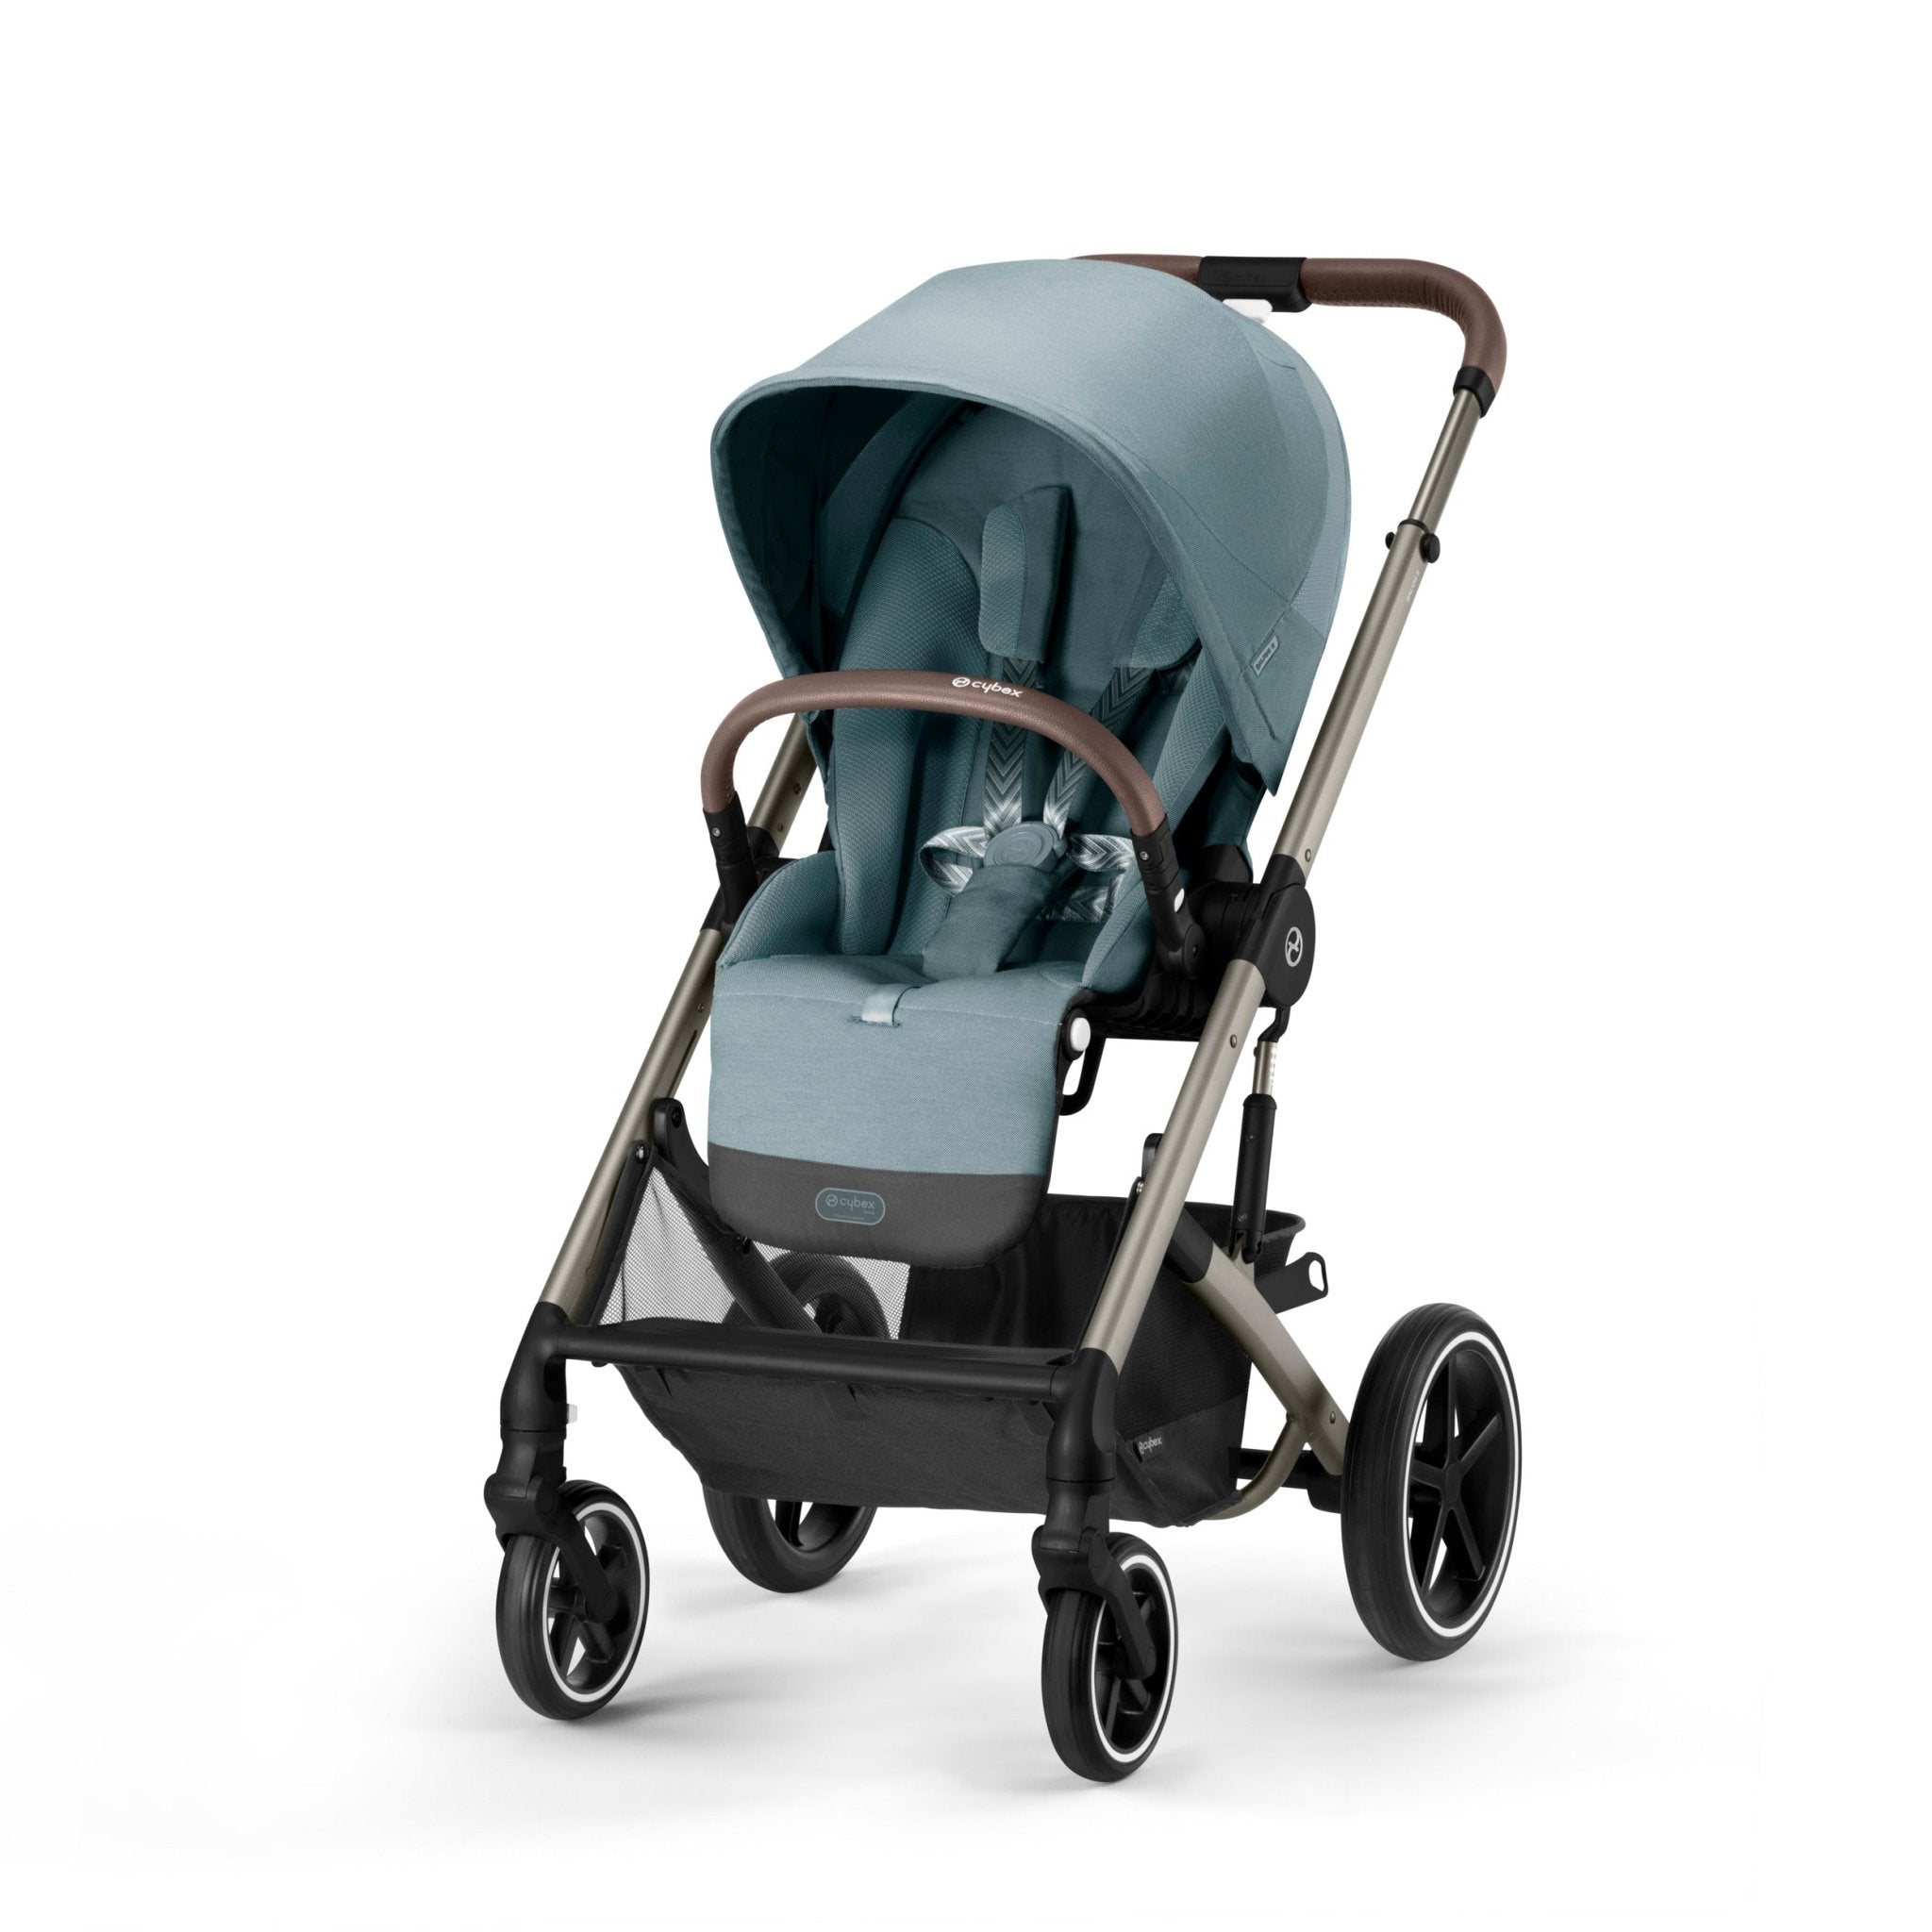 Cybex Balios S Lux 2 Stroller - ANB Baby -4063846314041$500 -$1000